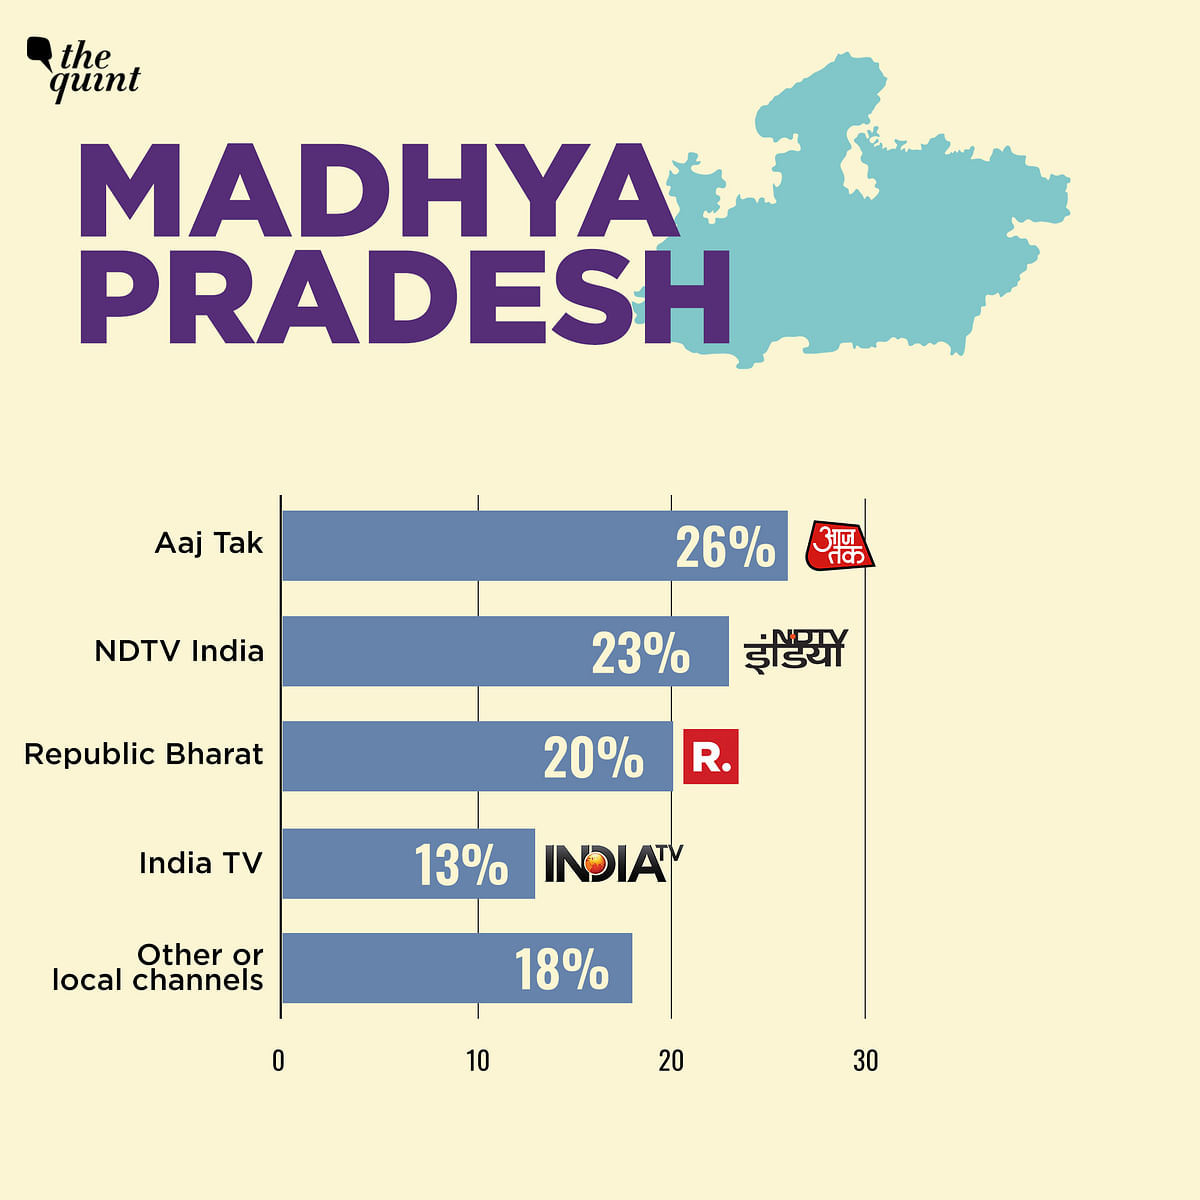 The survey by Prashnam was conducted on 9 October across the states of Bihar, Madhya Pradesh, Rajasthan & Jharkhand.